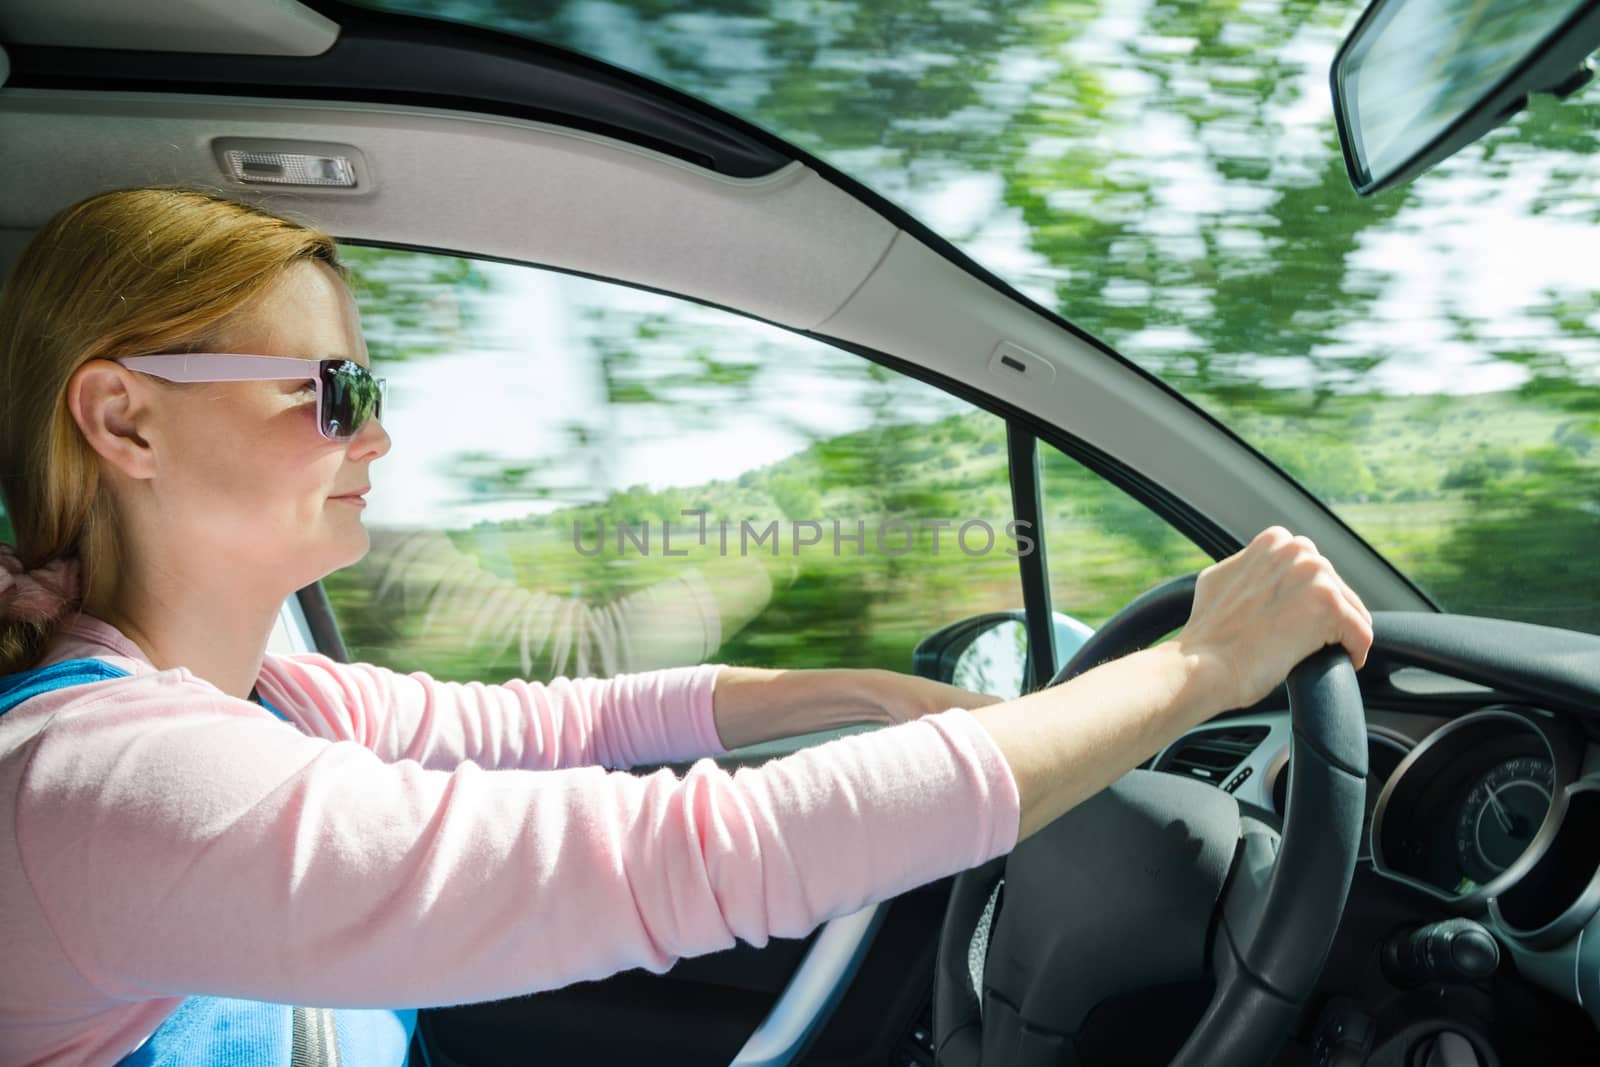 Smiling beautiful woman in sunglasses driving at high speed car with panoramic windshield. Internal stock photo with low shutter speed and blurred in motion natural background.